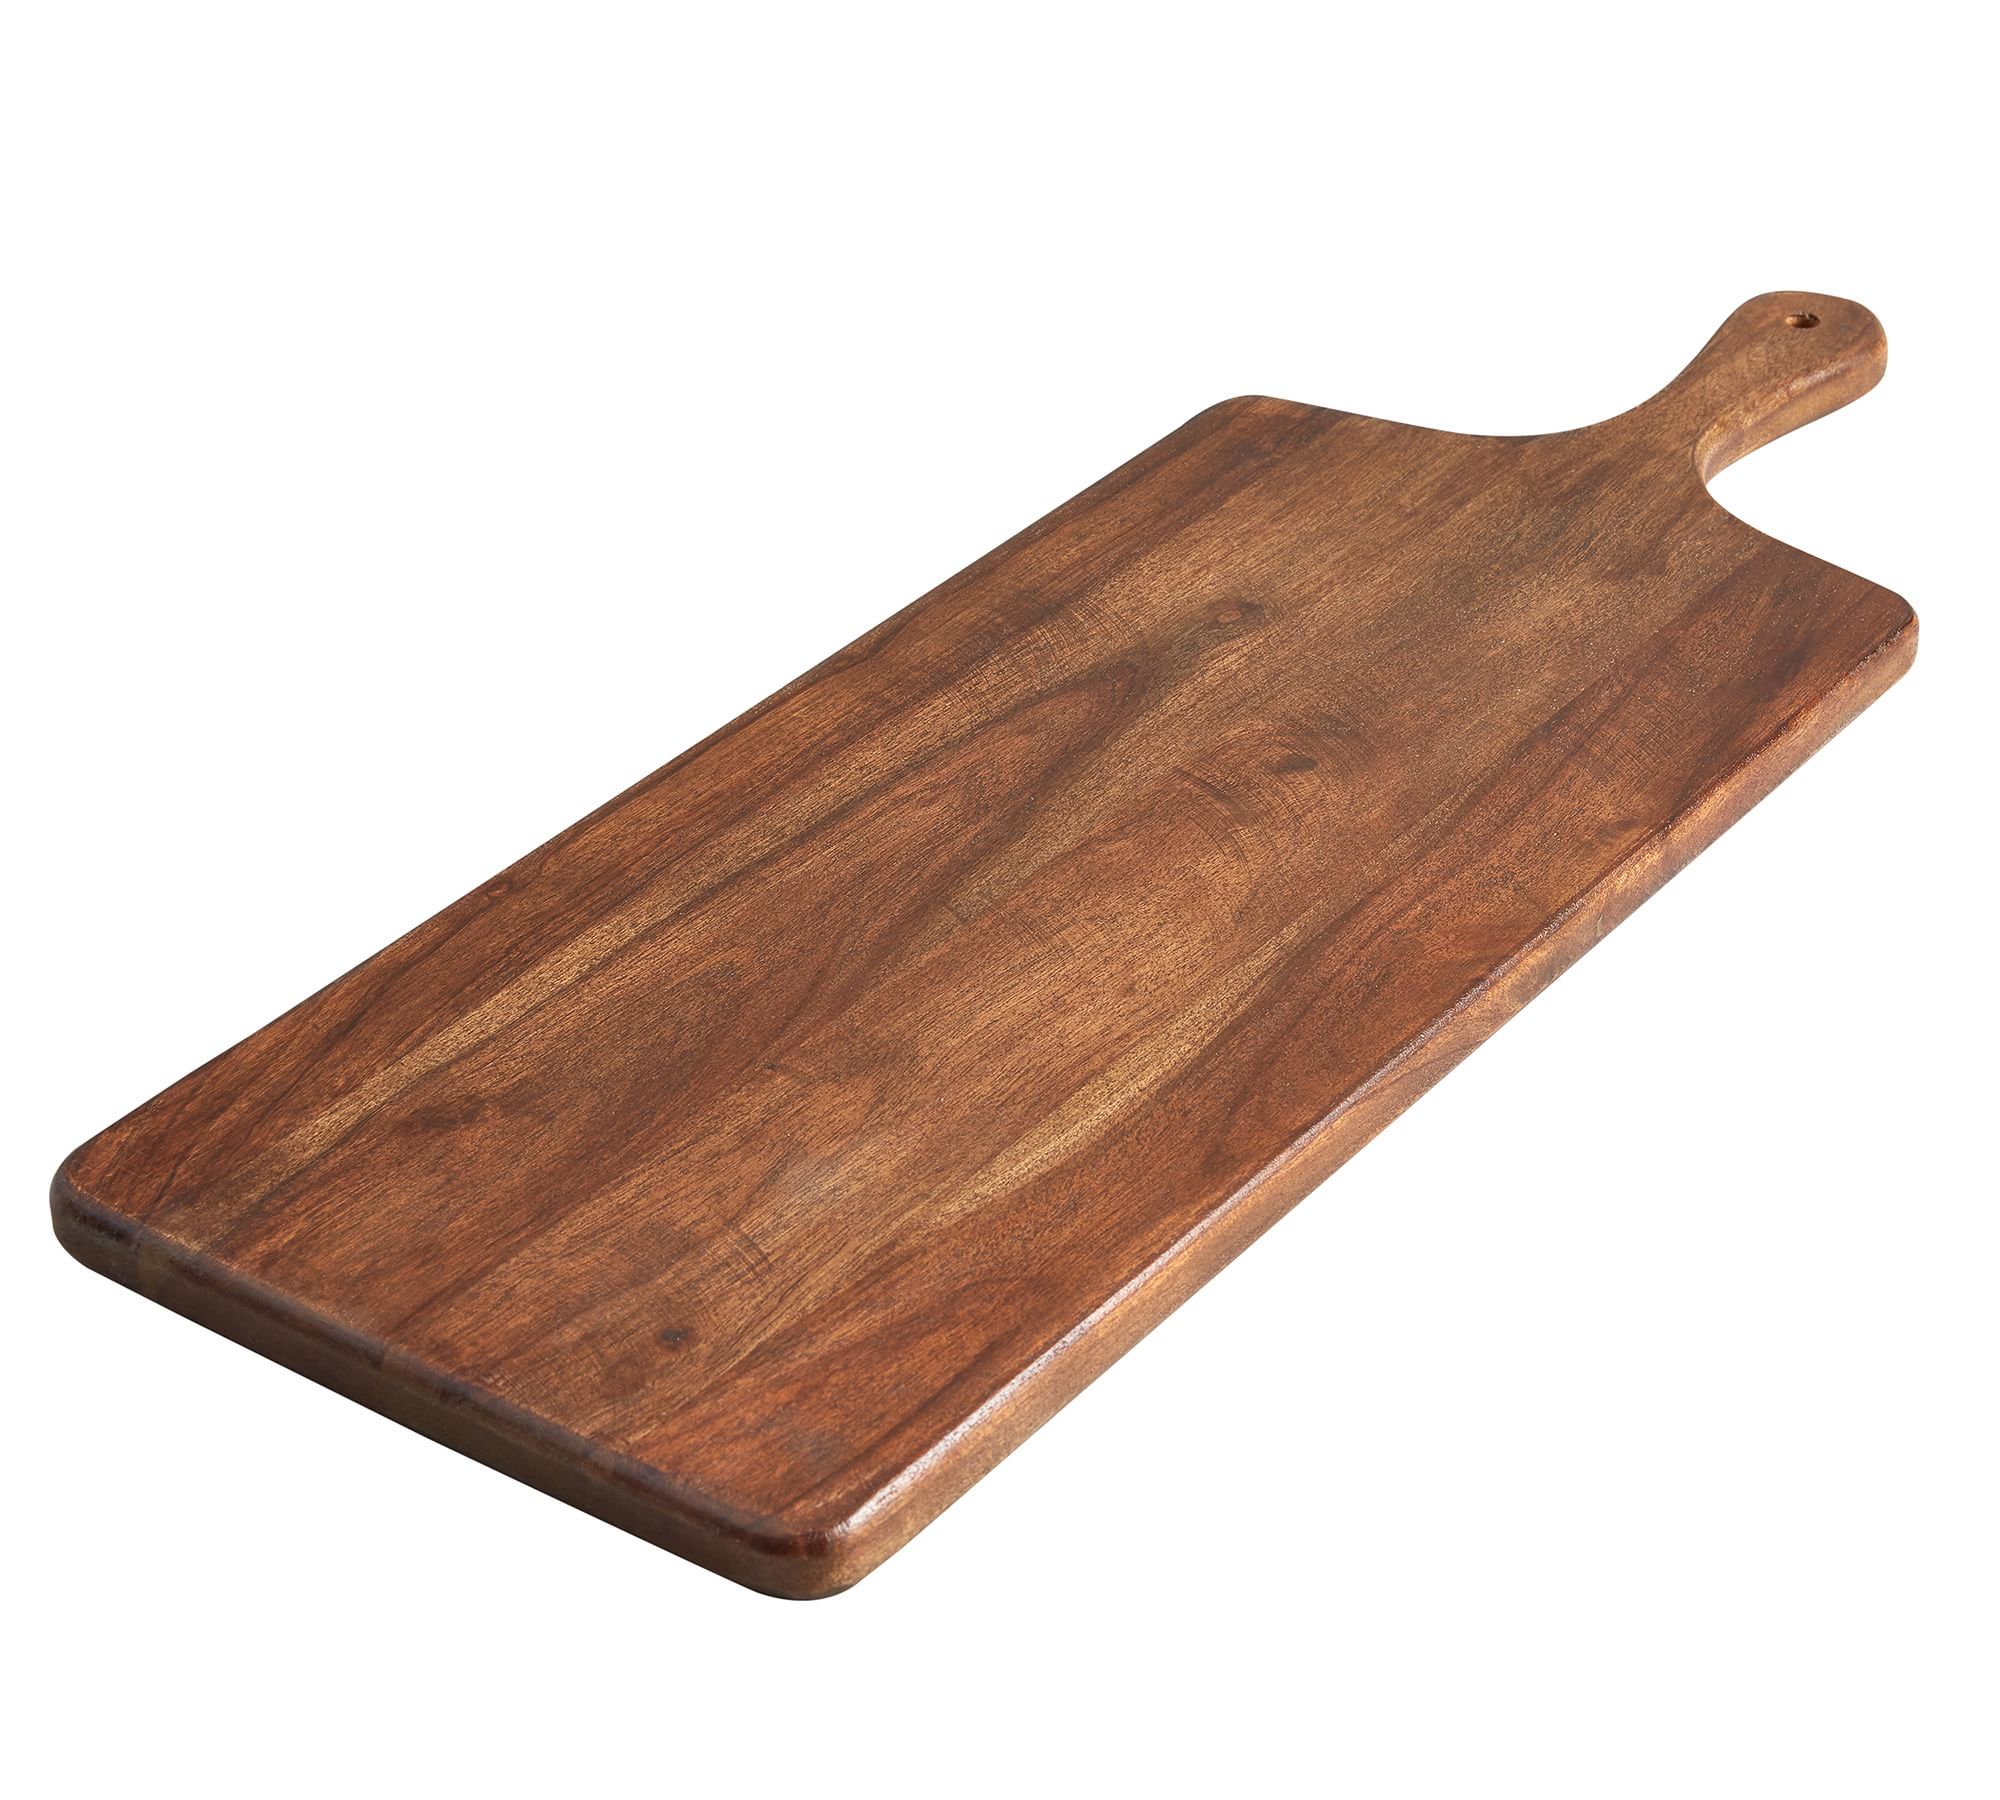 Chateau Handcrafted Acacia Wood Cheese & Charcuterie Boards | Pottery Barn